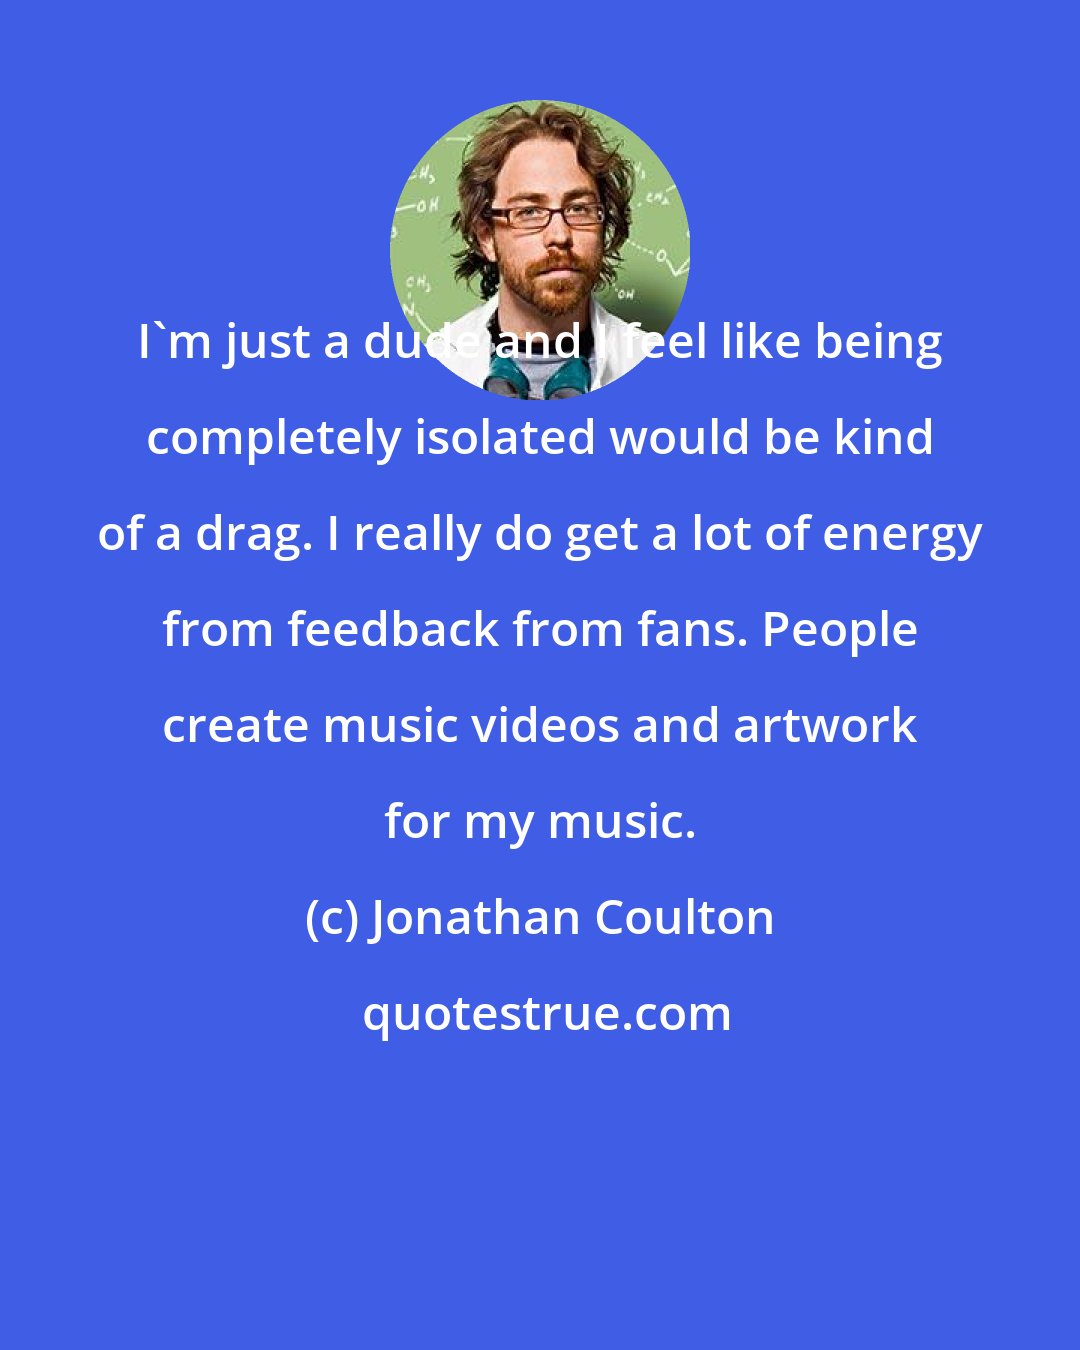 Jonathan Coulton: I'm just a dude and I feel like being completely isolated would be kind of a drag. I really do get a lot of energy from feedback from fans. People create music videos and artwork for my music.